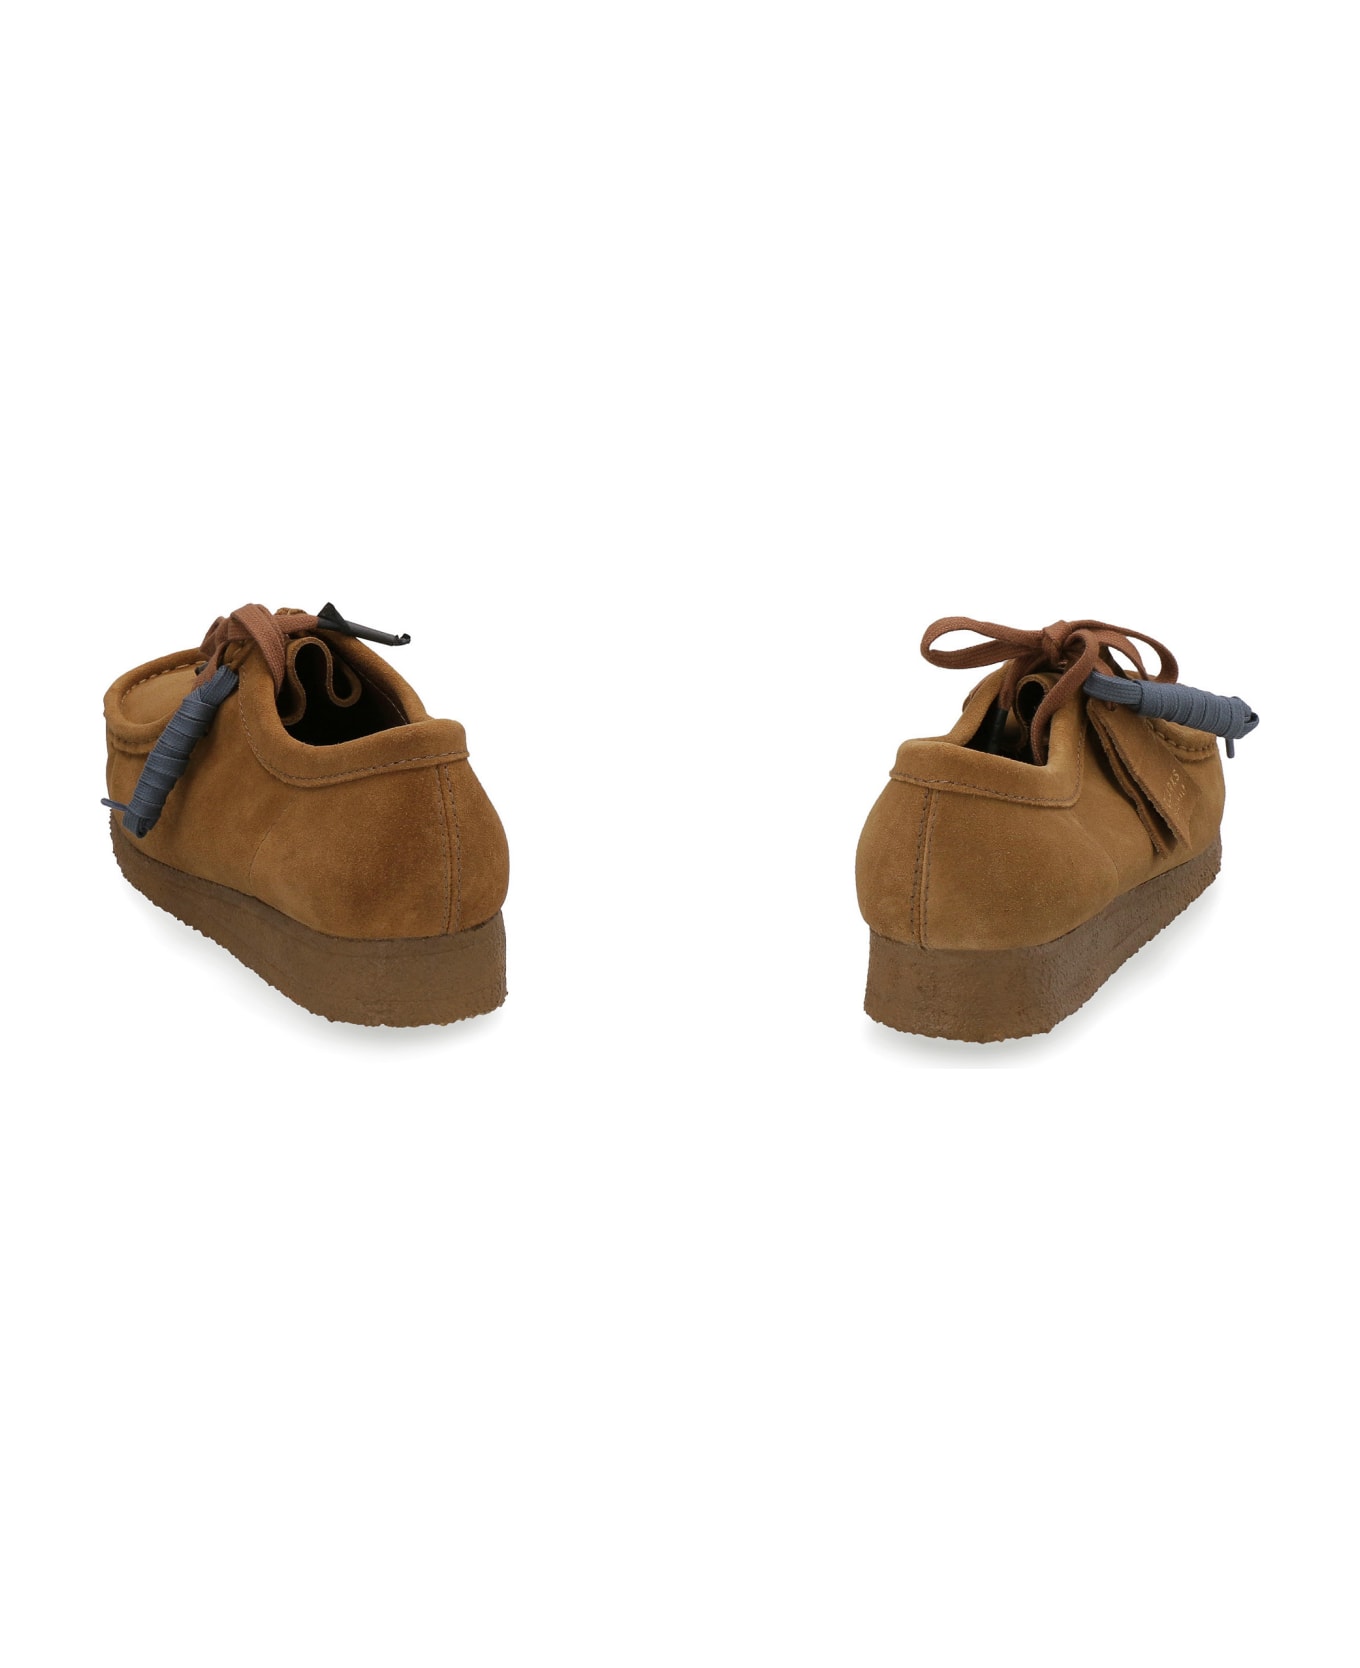 Clarks Wallabee Suede Lace-up Shoes - Saddle Brown ローファー＆デッキシューズ